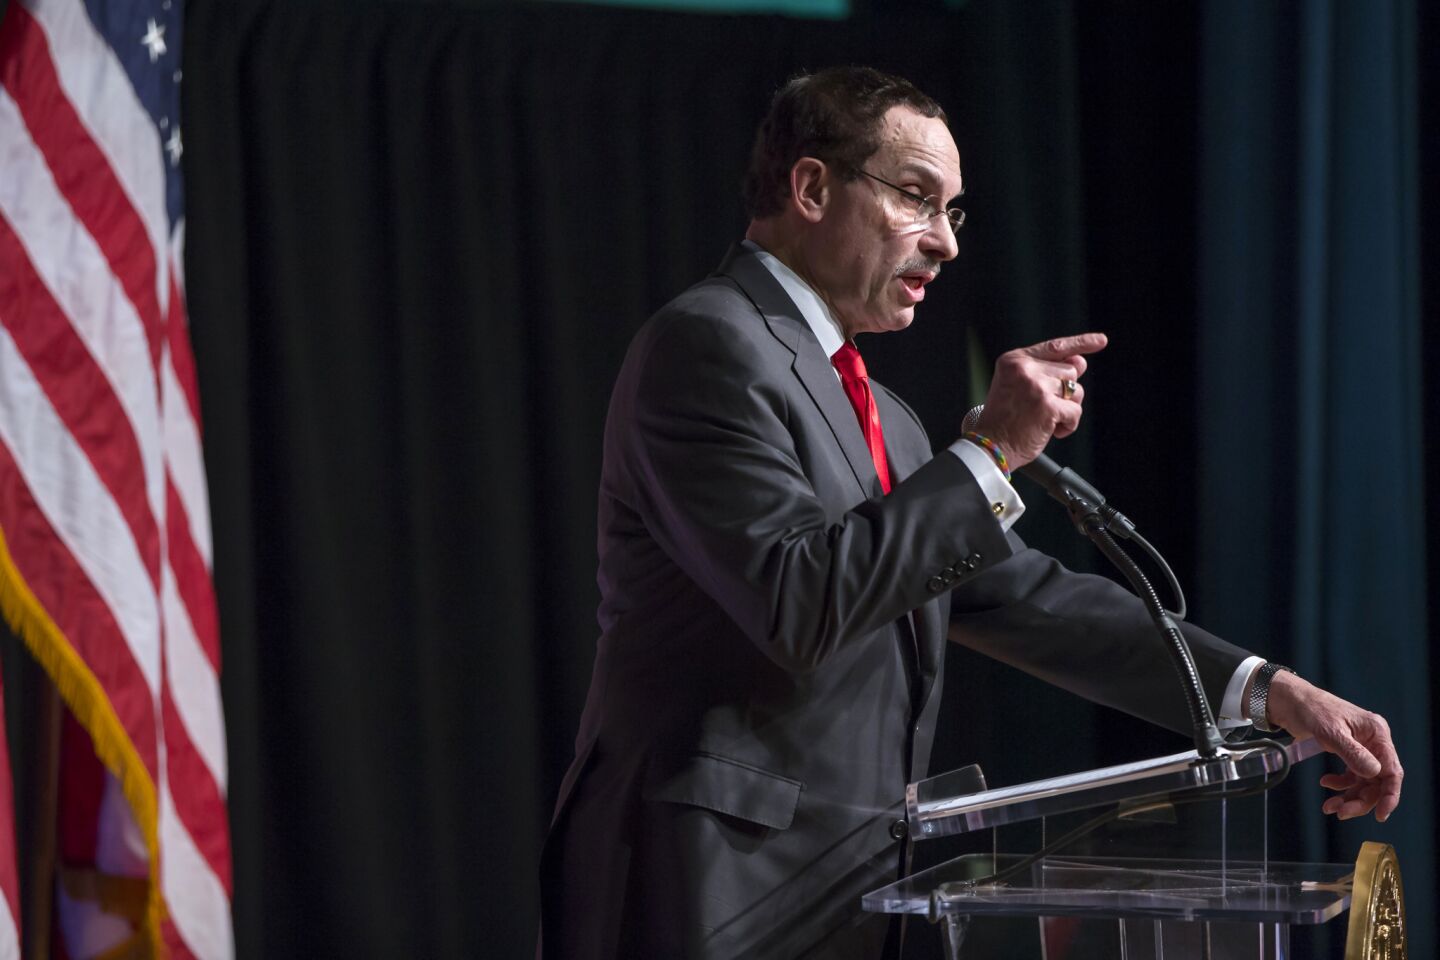 D.C. Mayor Vincent Gray delivers his State of the District address March 11, telling residents that he did not break the law in a campaign-fundraising scandal. Gray's address came one day after a U.S. attorney said the mayor knew about a "shadow campaign" from his 2010 election.